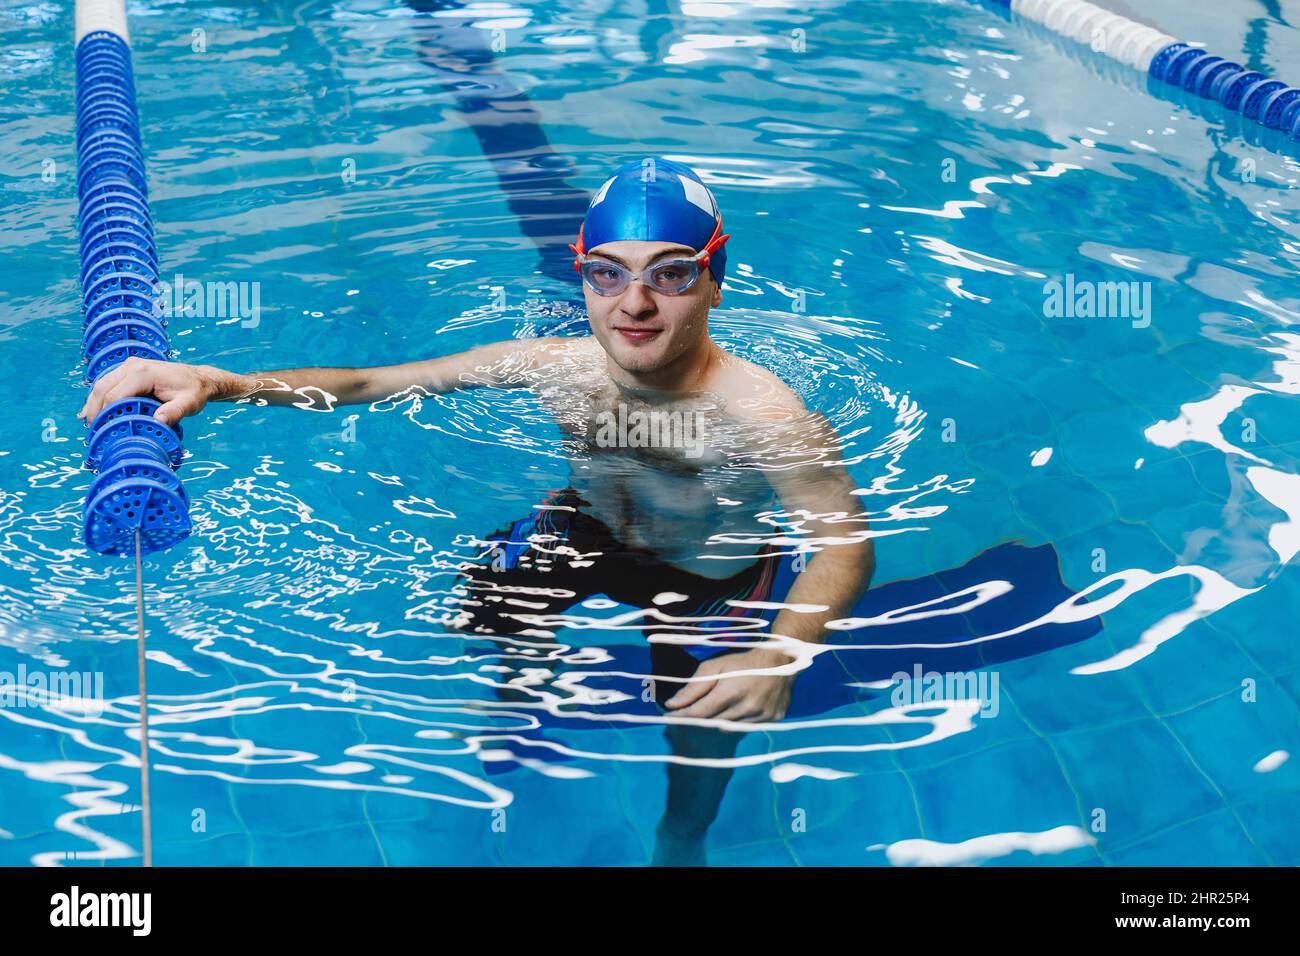 latin young man teenager swimmer athlete wearing cap and goggles in a swimming training in the Pool in Mexico Latin America Stock Photo